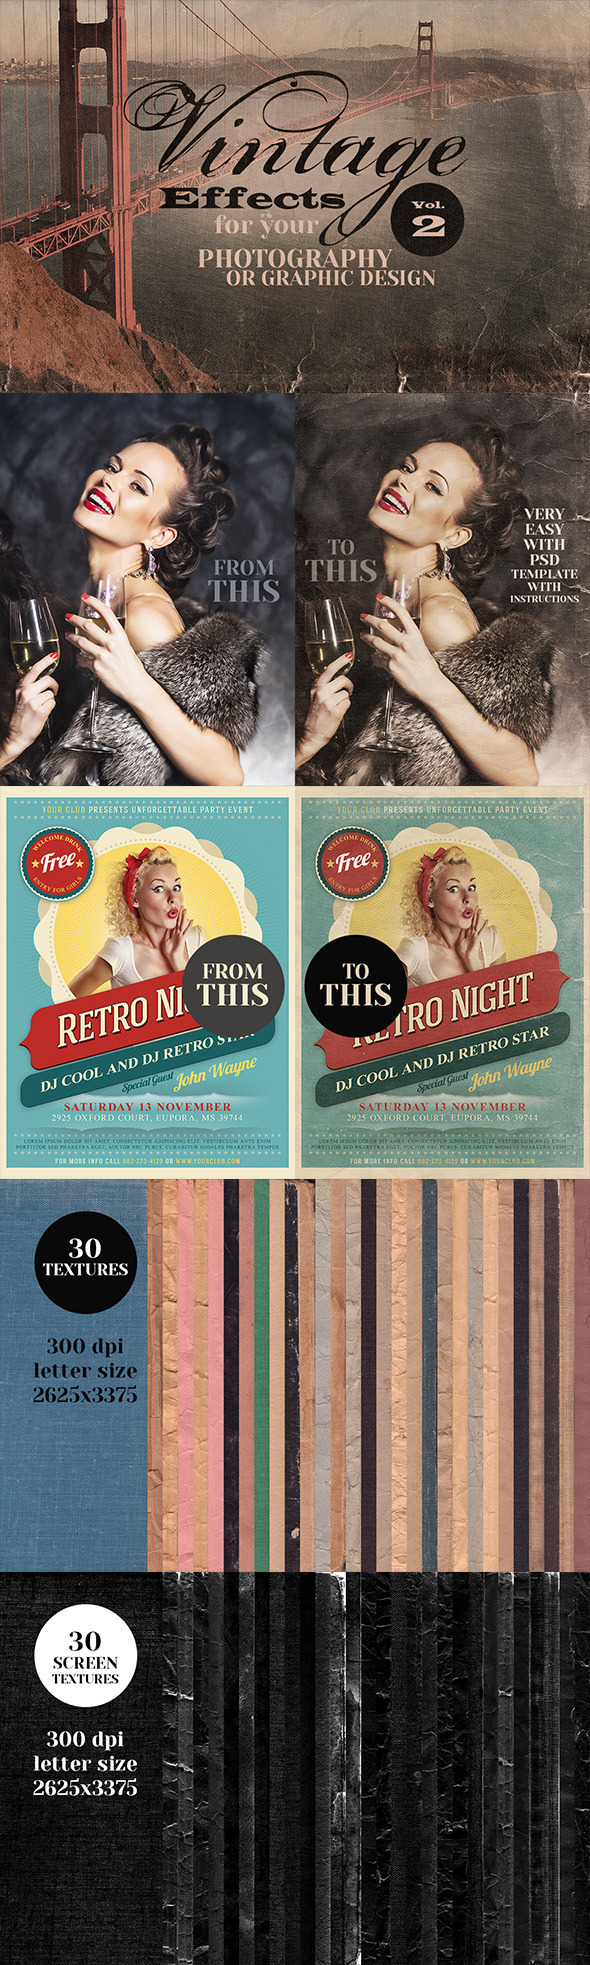 Vintage Effects for Photo or Designs vol.2